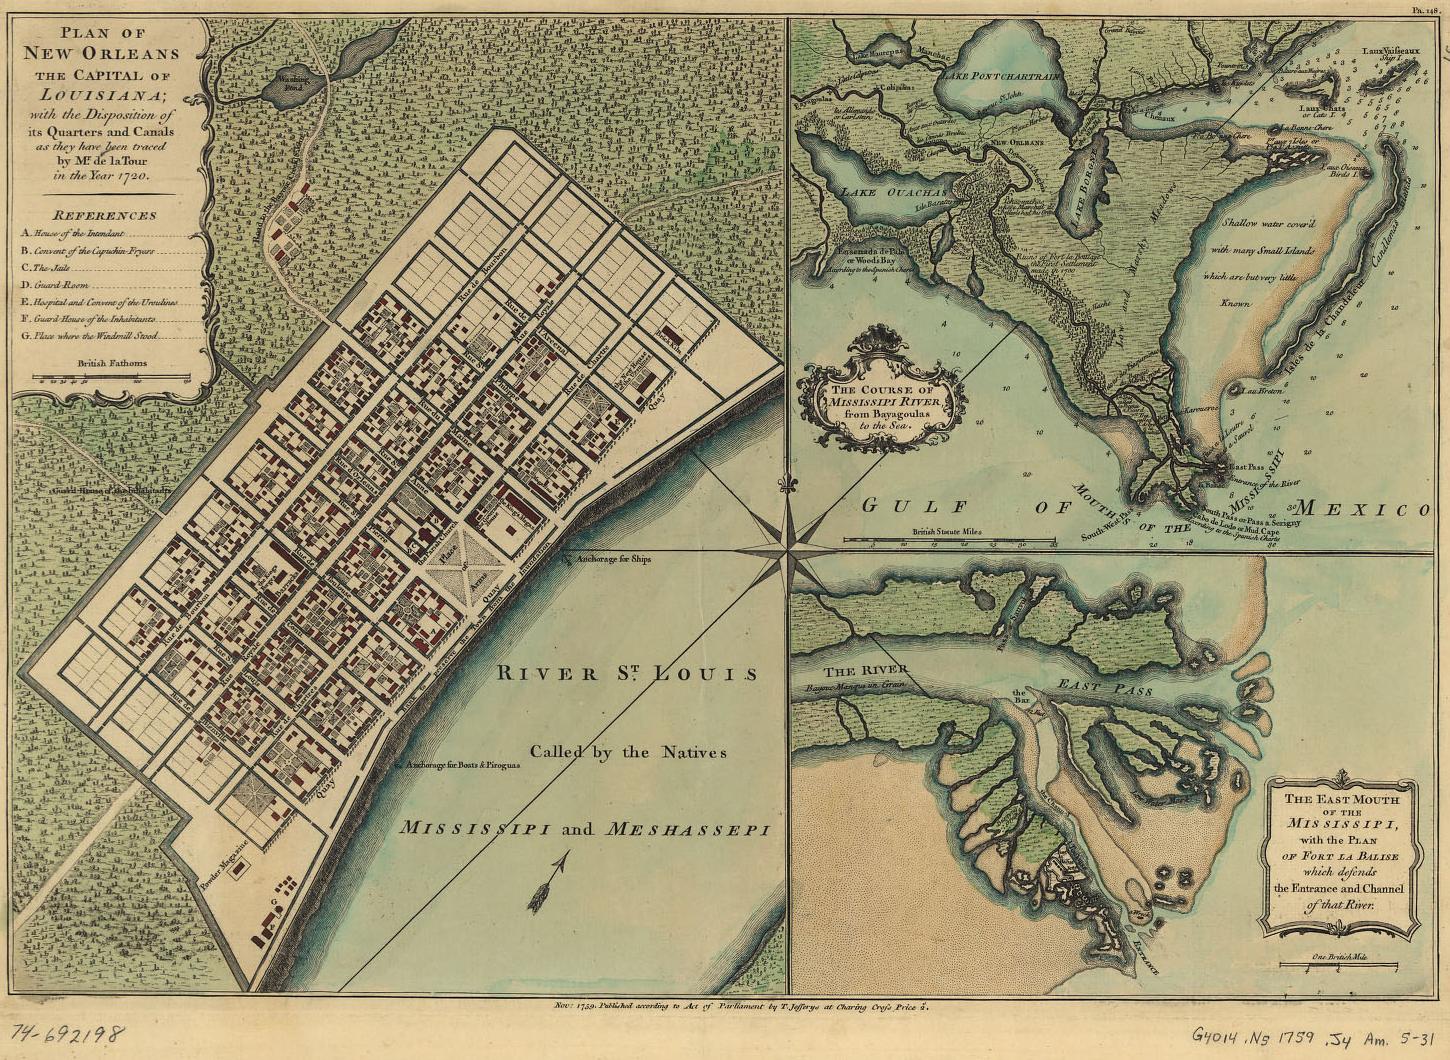 1759 map with road to Bayou St. John (and then to the Lake